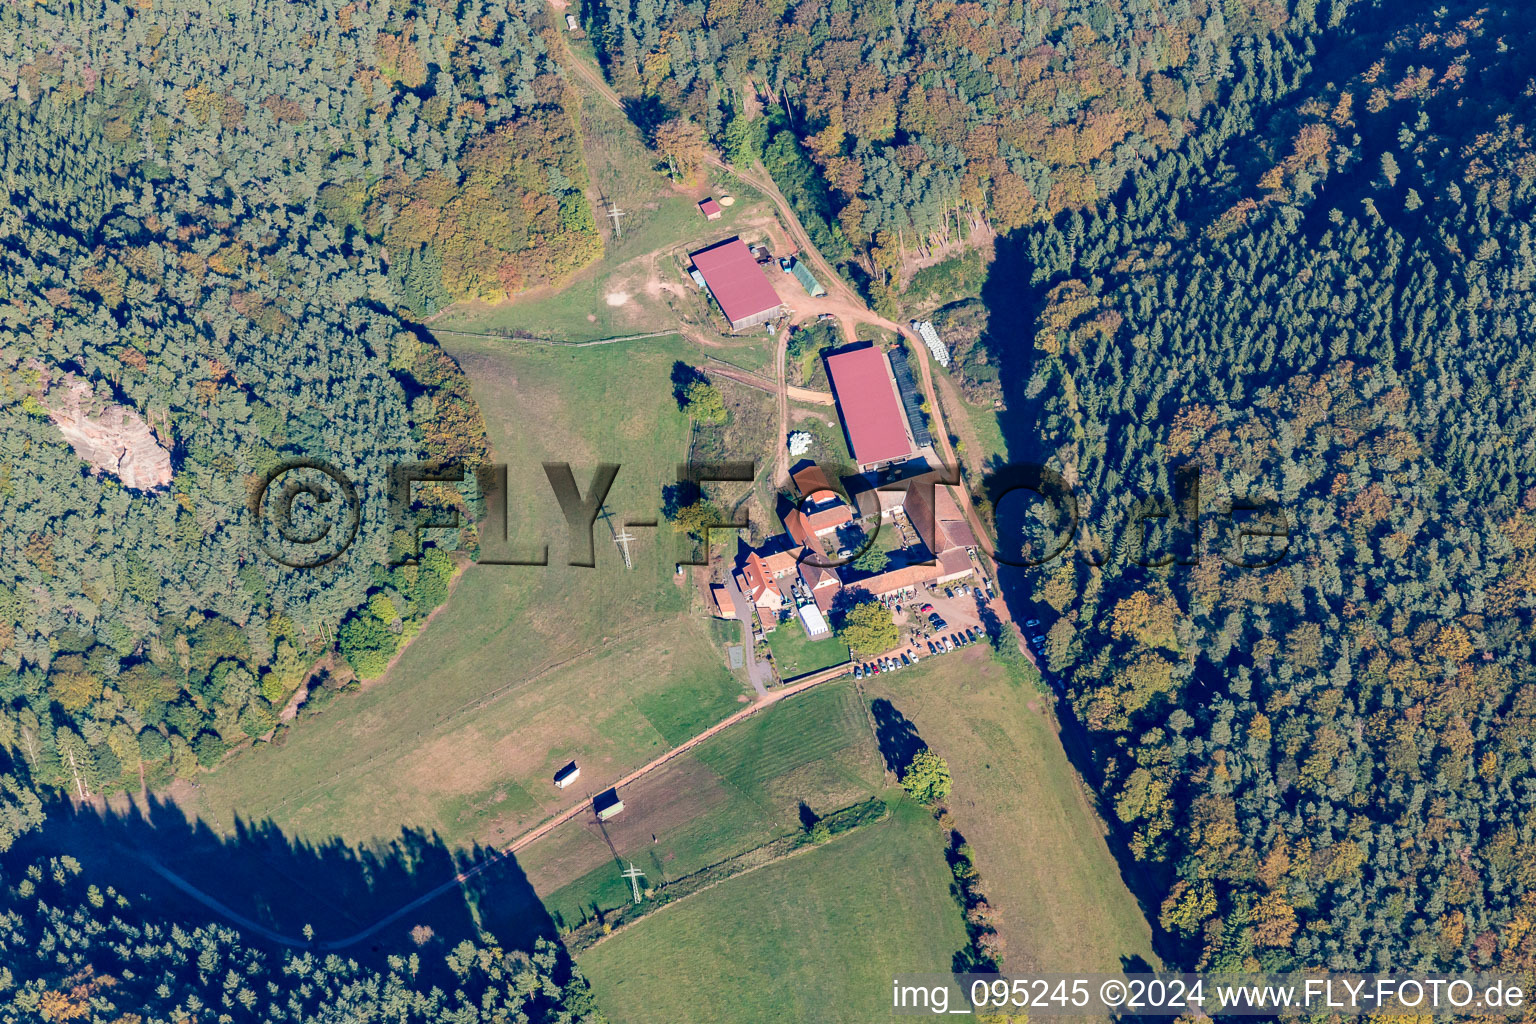 Aerial view of Schindhard in the state Rhineland-Palatinate, Germany